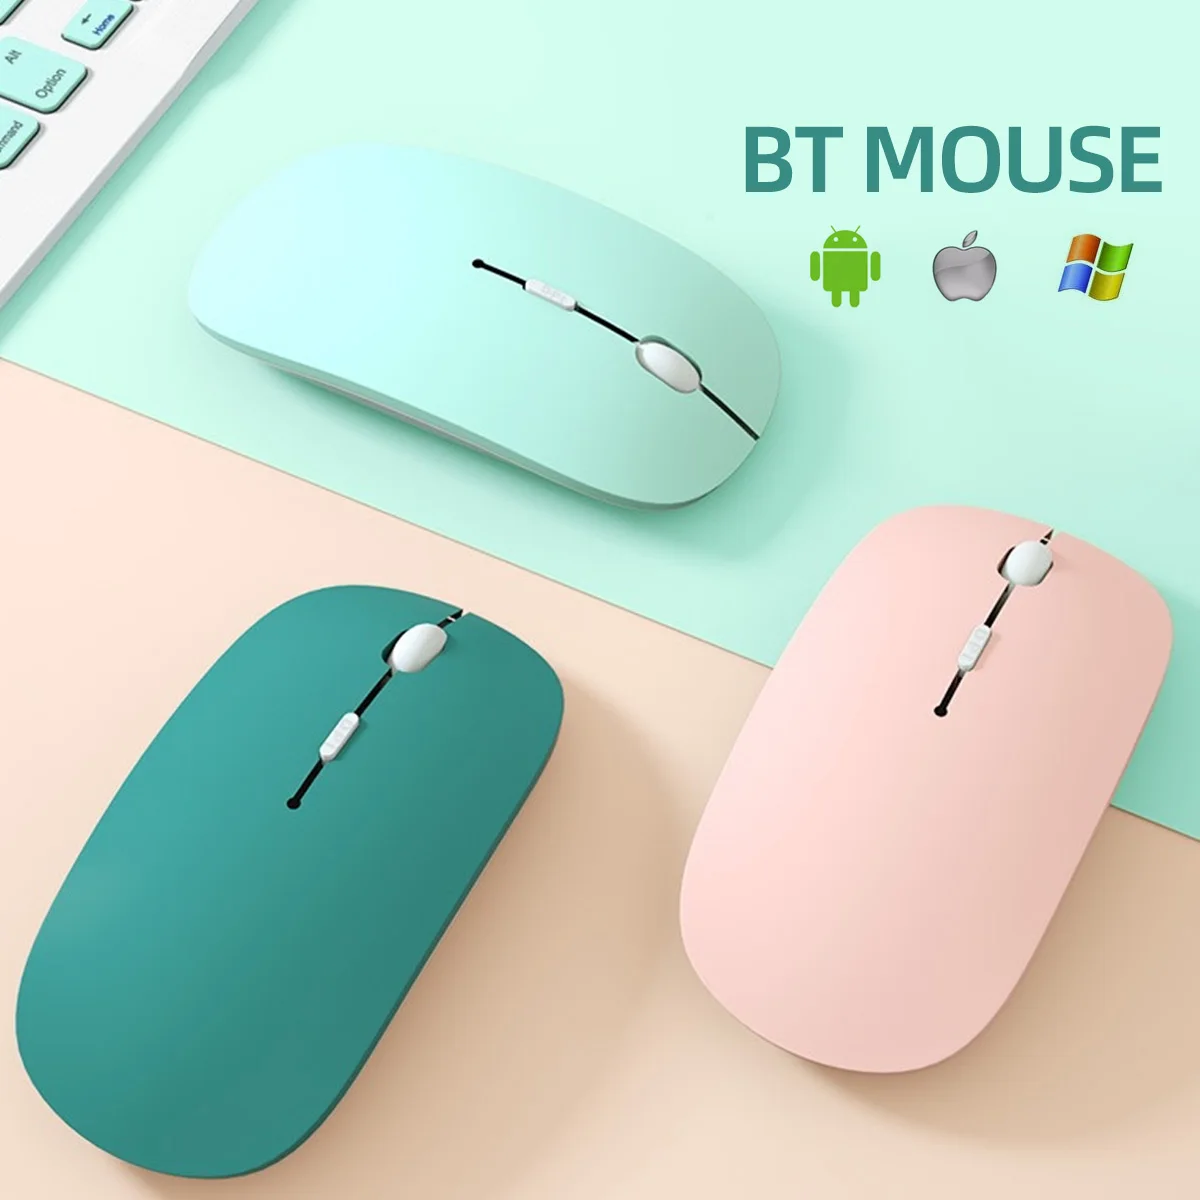 Mouse Bluetooth muto per iPad Samsung Huawei Android Windows Tablet Mouse Wireless da gioco ultrasottile per pc Notebook